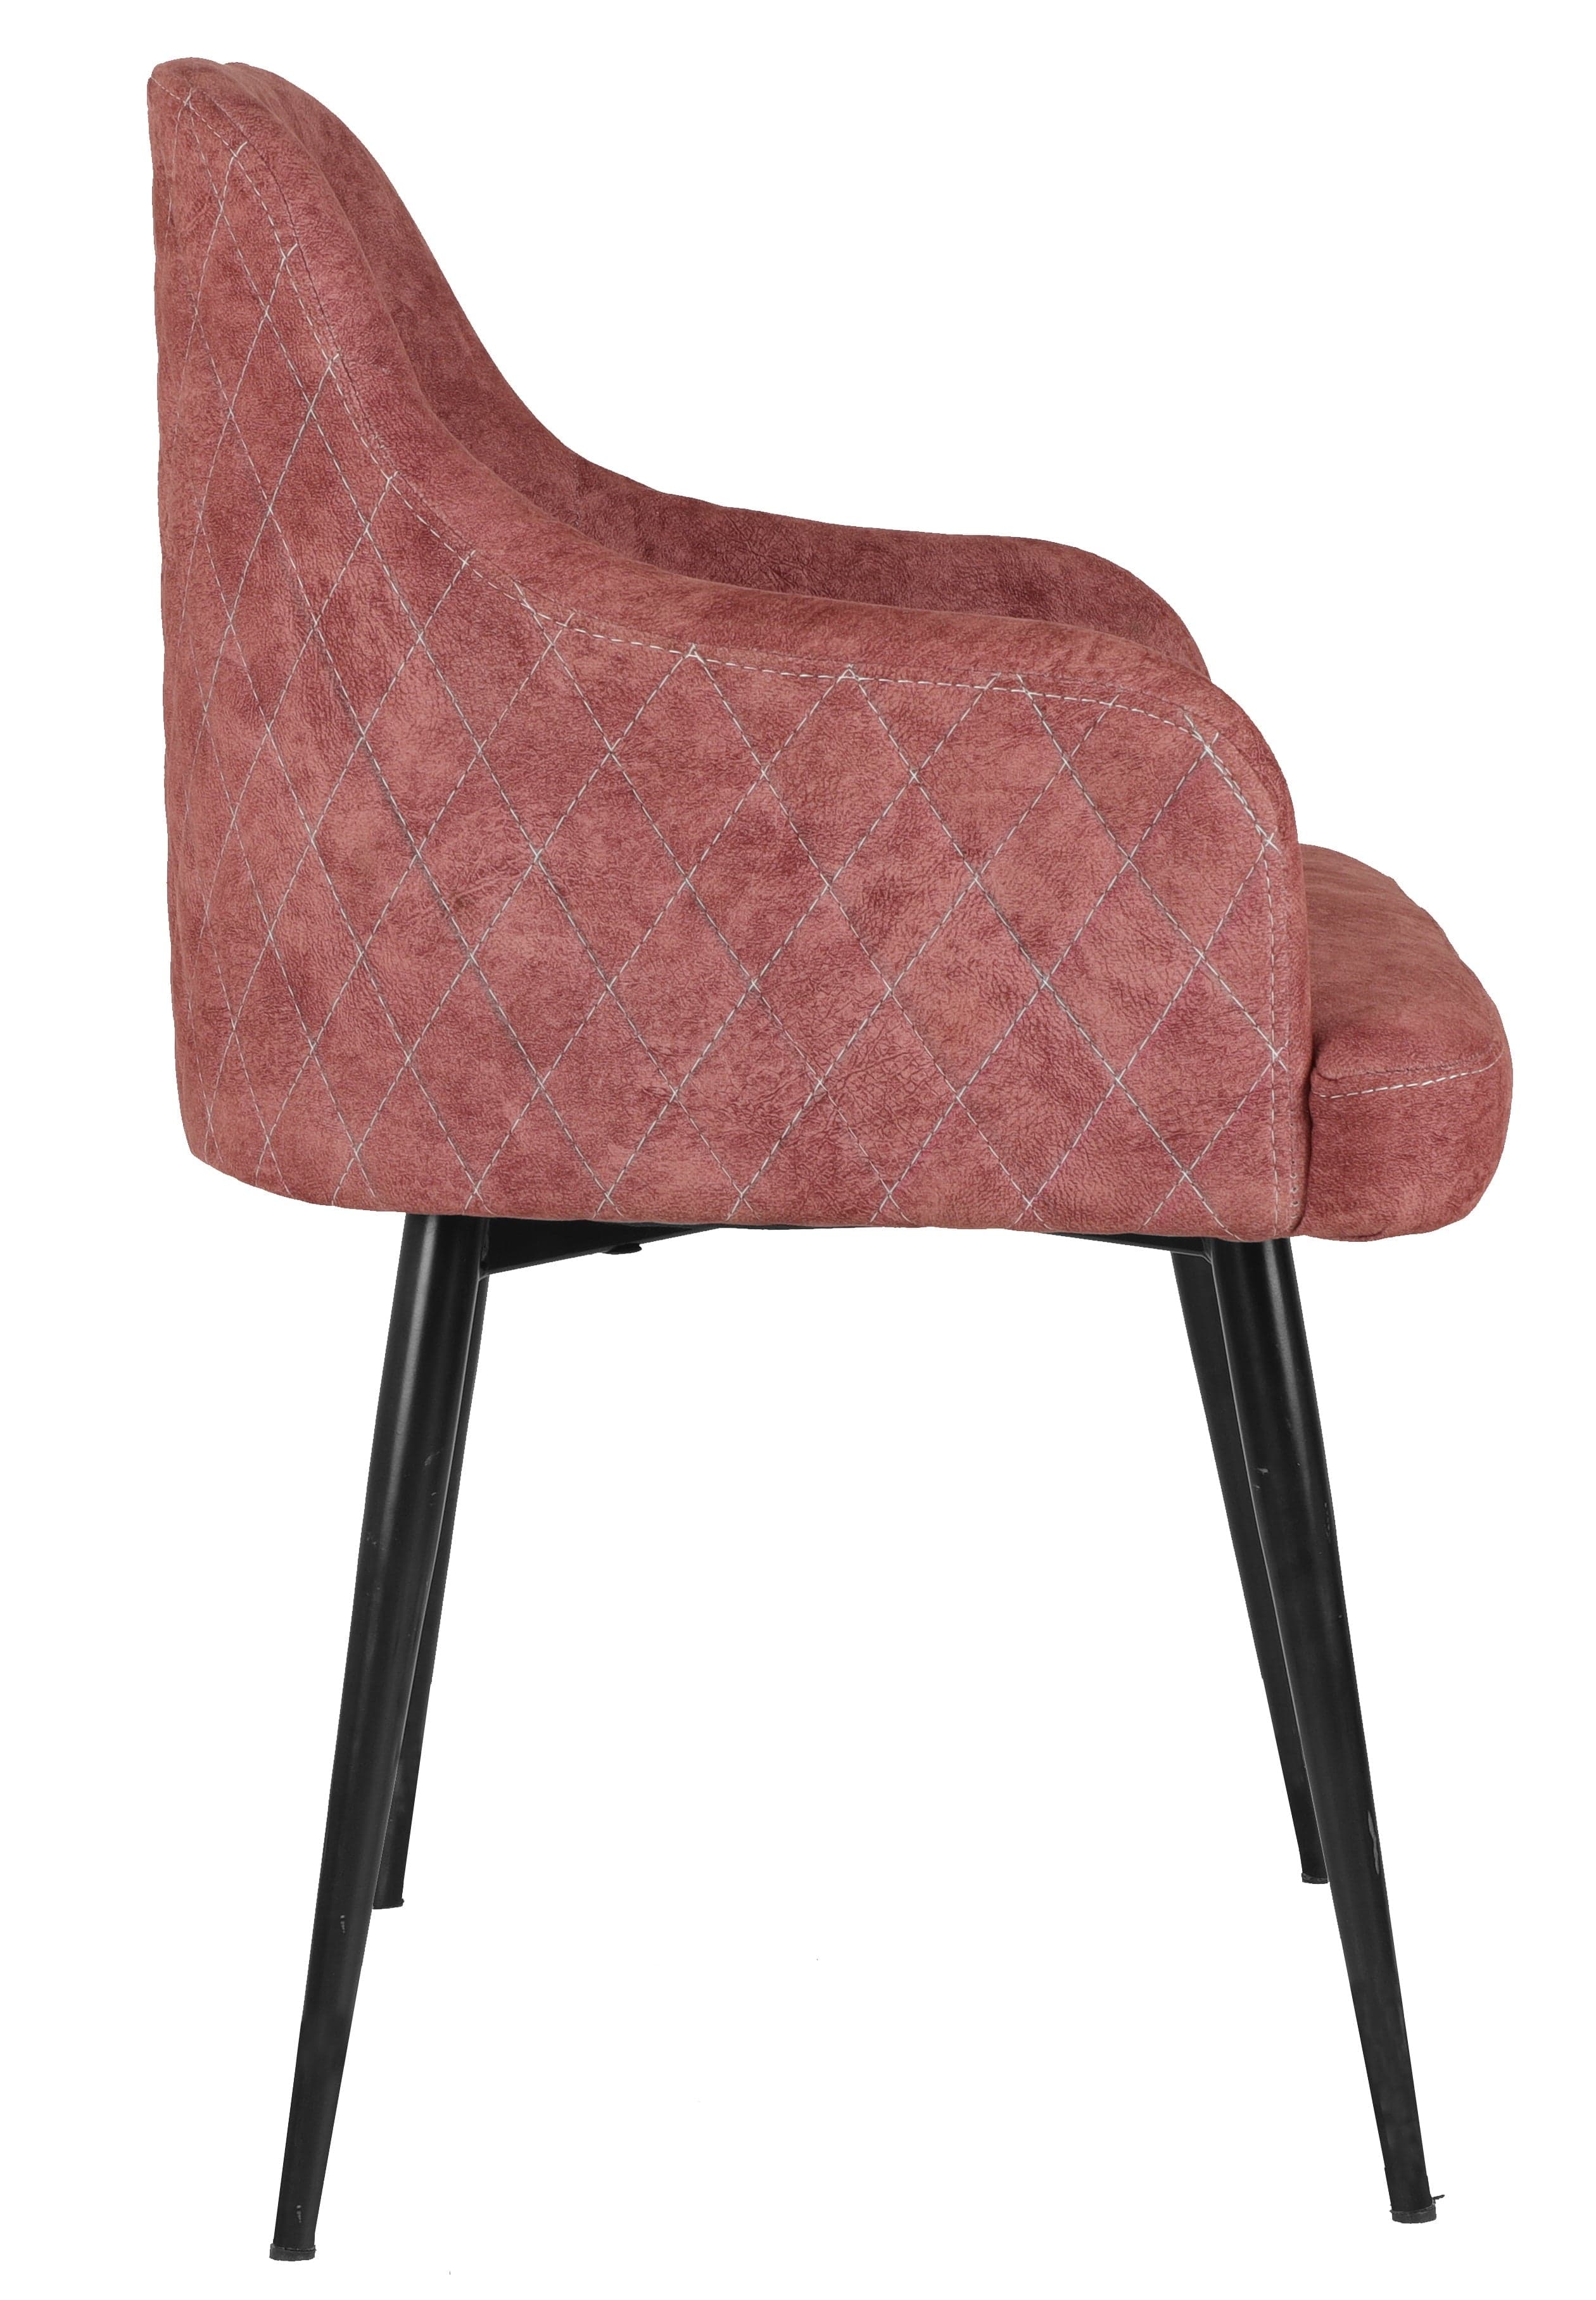 Adiko Lounge Chair Stool in Cherry Color